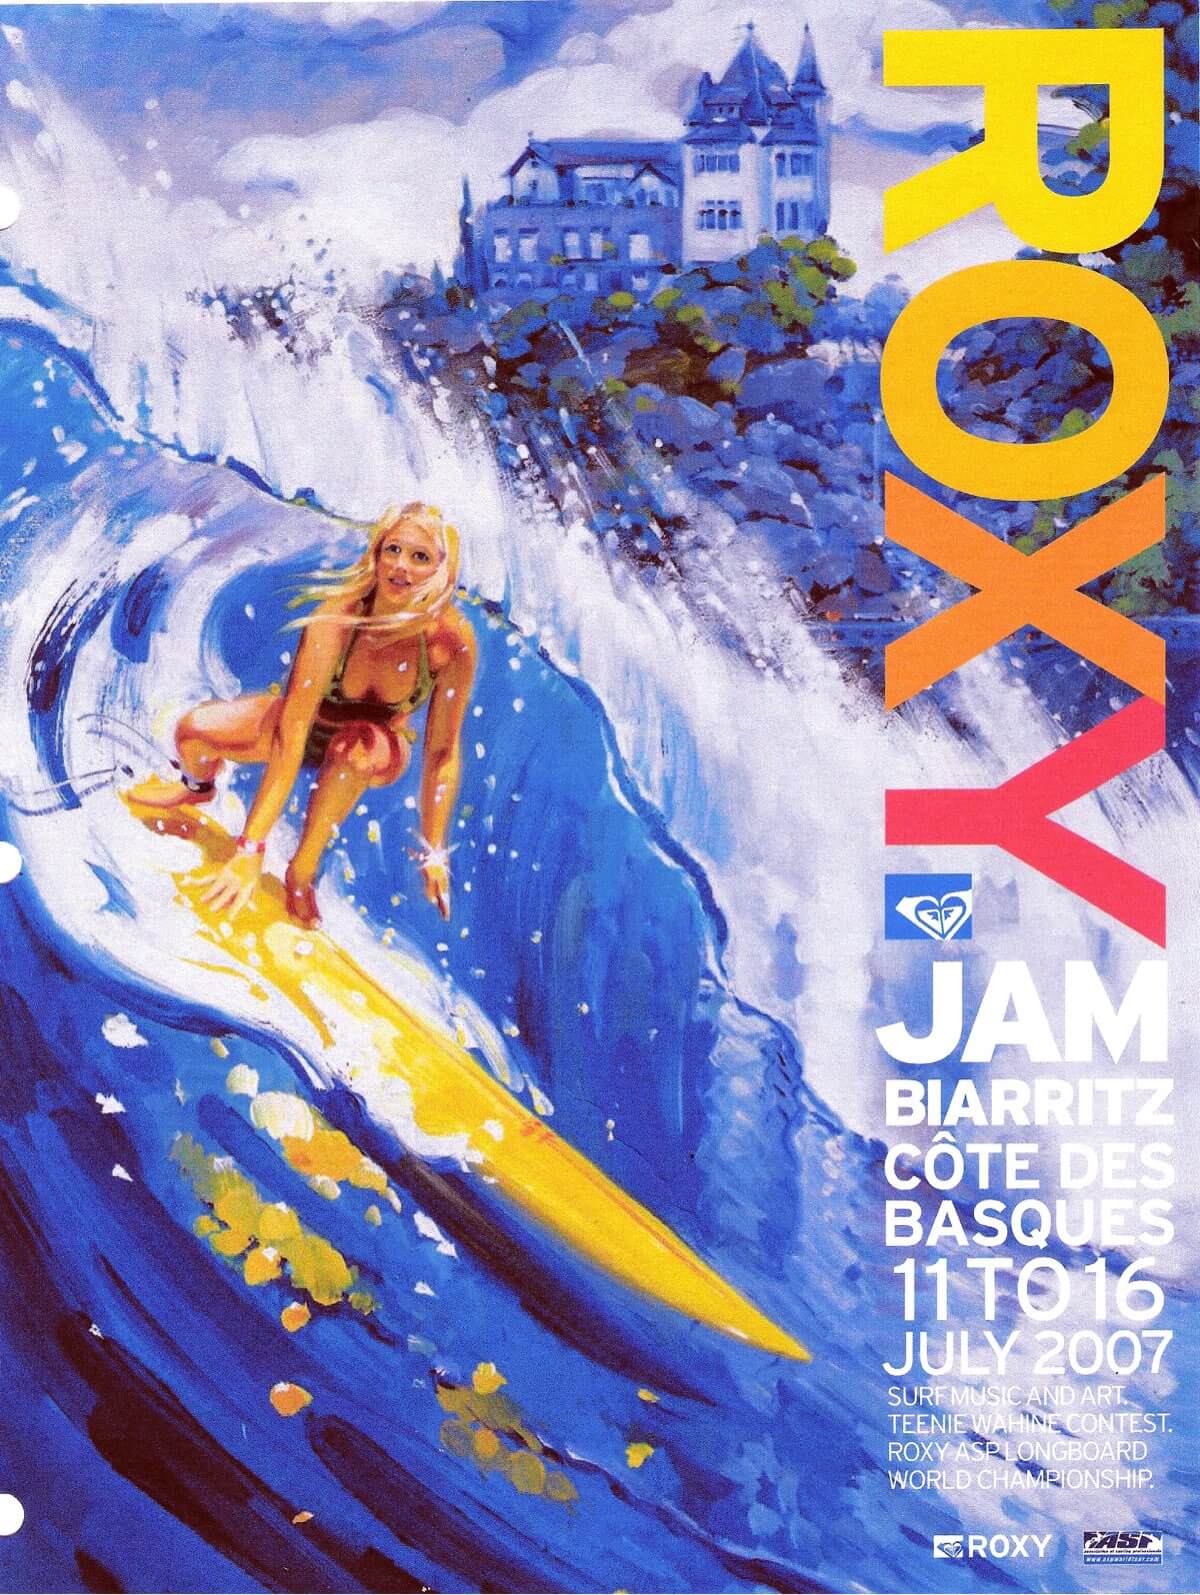 Roxy Jam Biarritz poster (2007) featuring surf art by Ron Croci